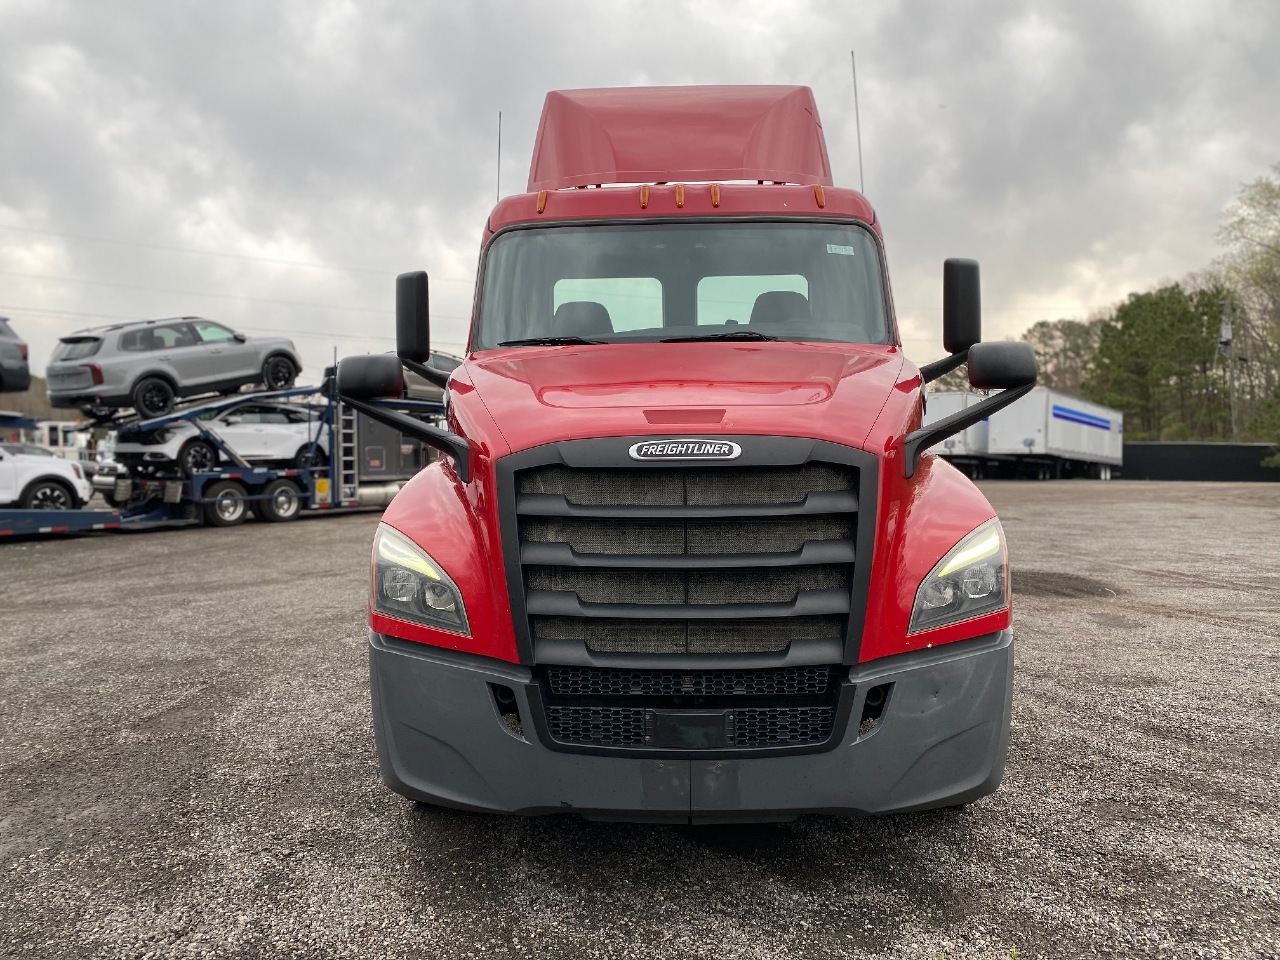 USED 2018 FREIGHTLINER CASCADIA TANDEM AXLE DAYCAB TRUCK #15242